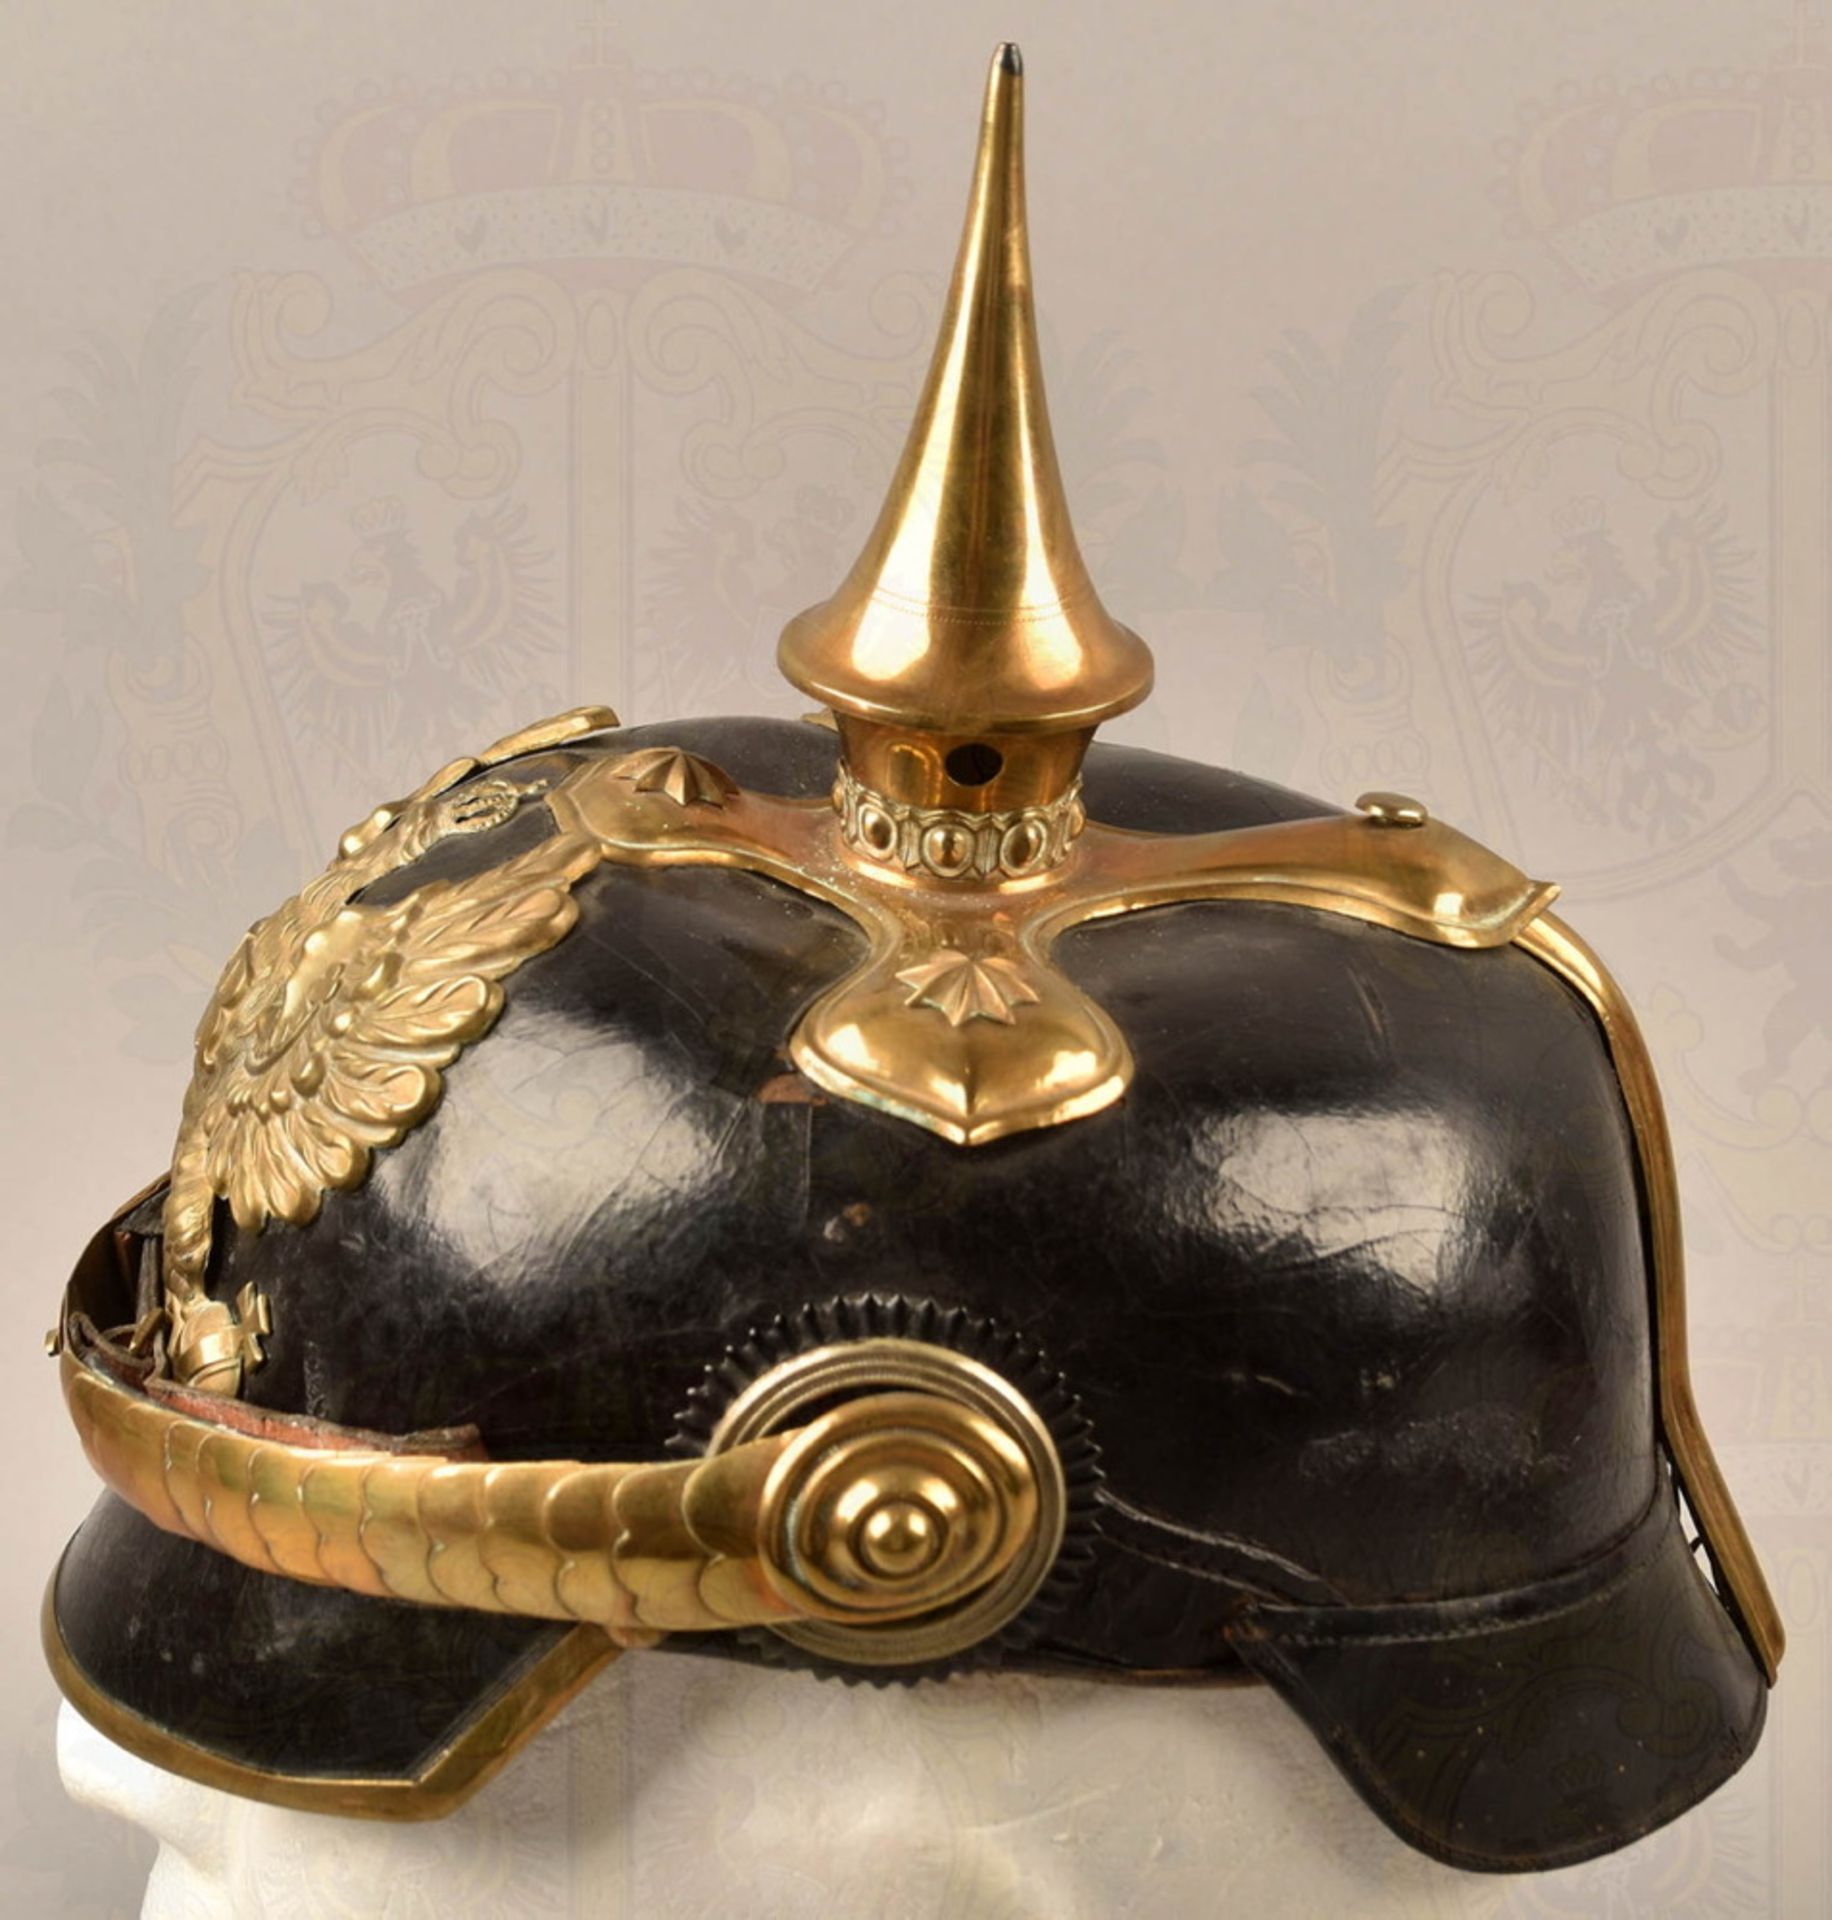 Helmet for military officials/officer rank - Image 3 of 7